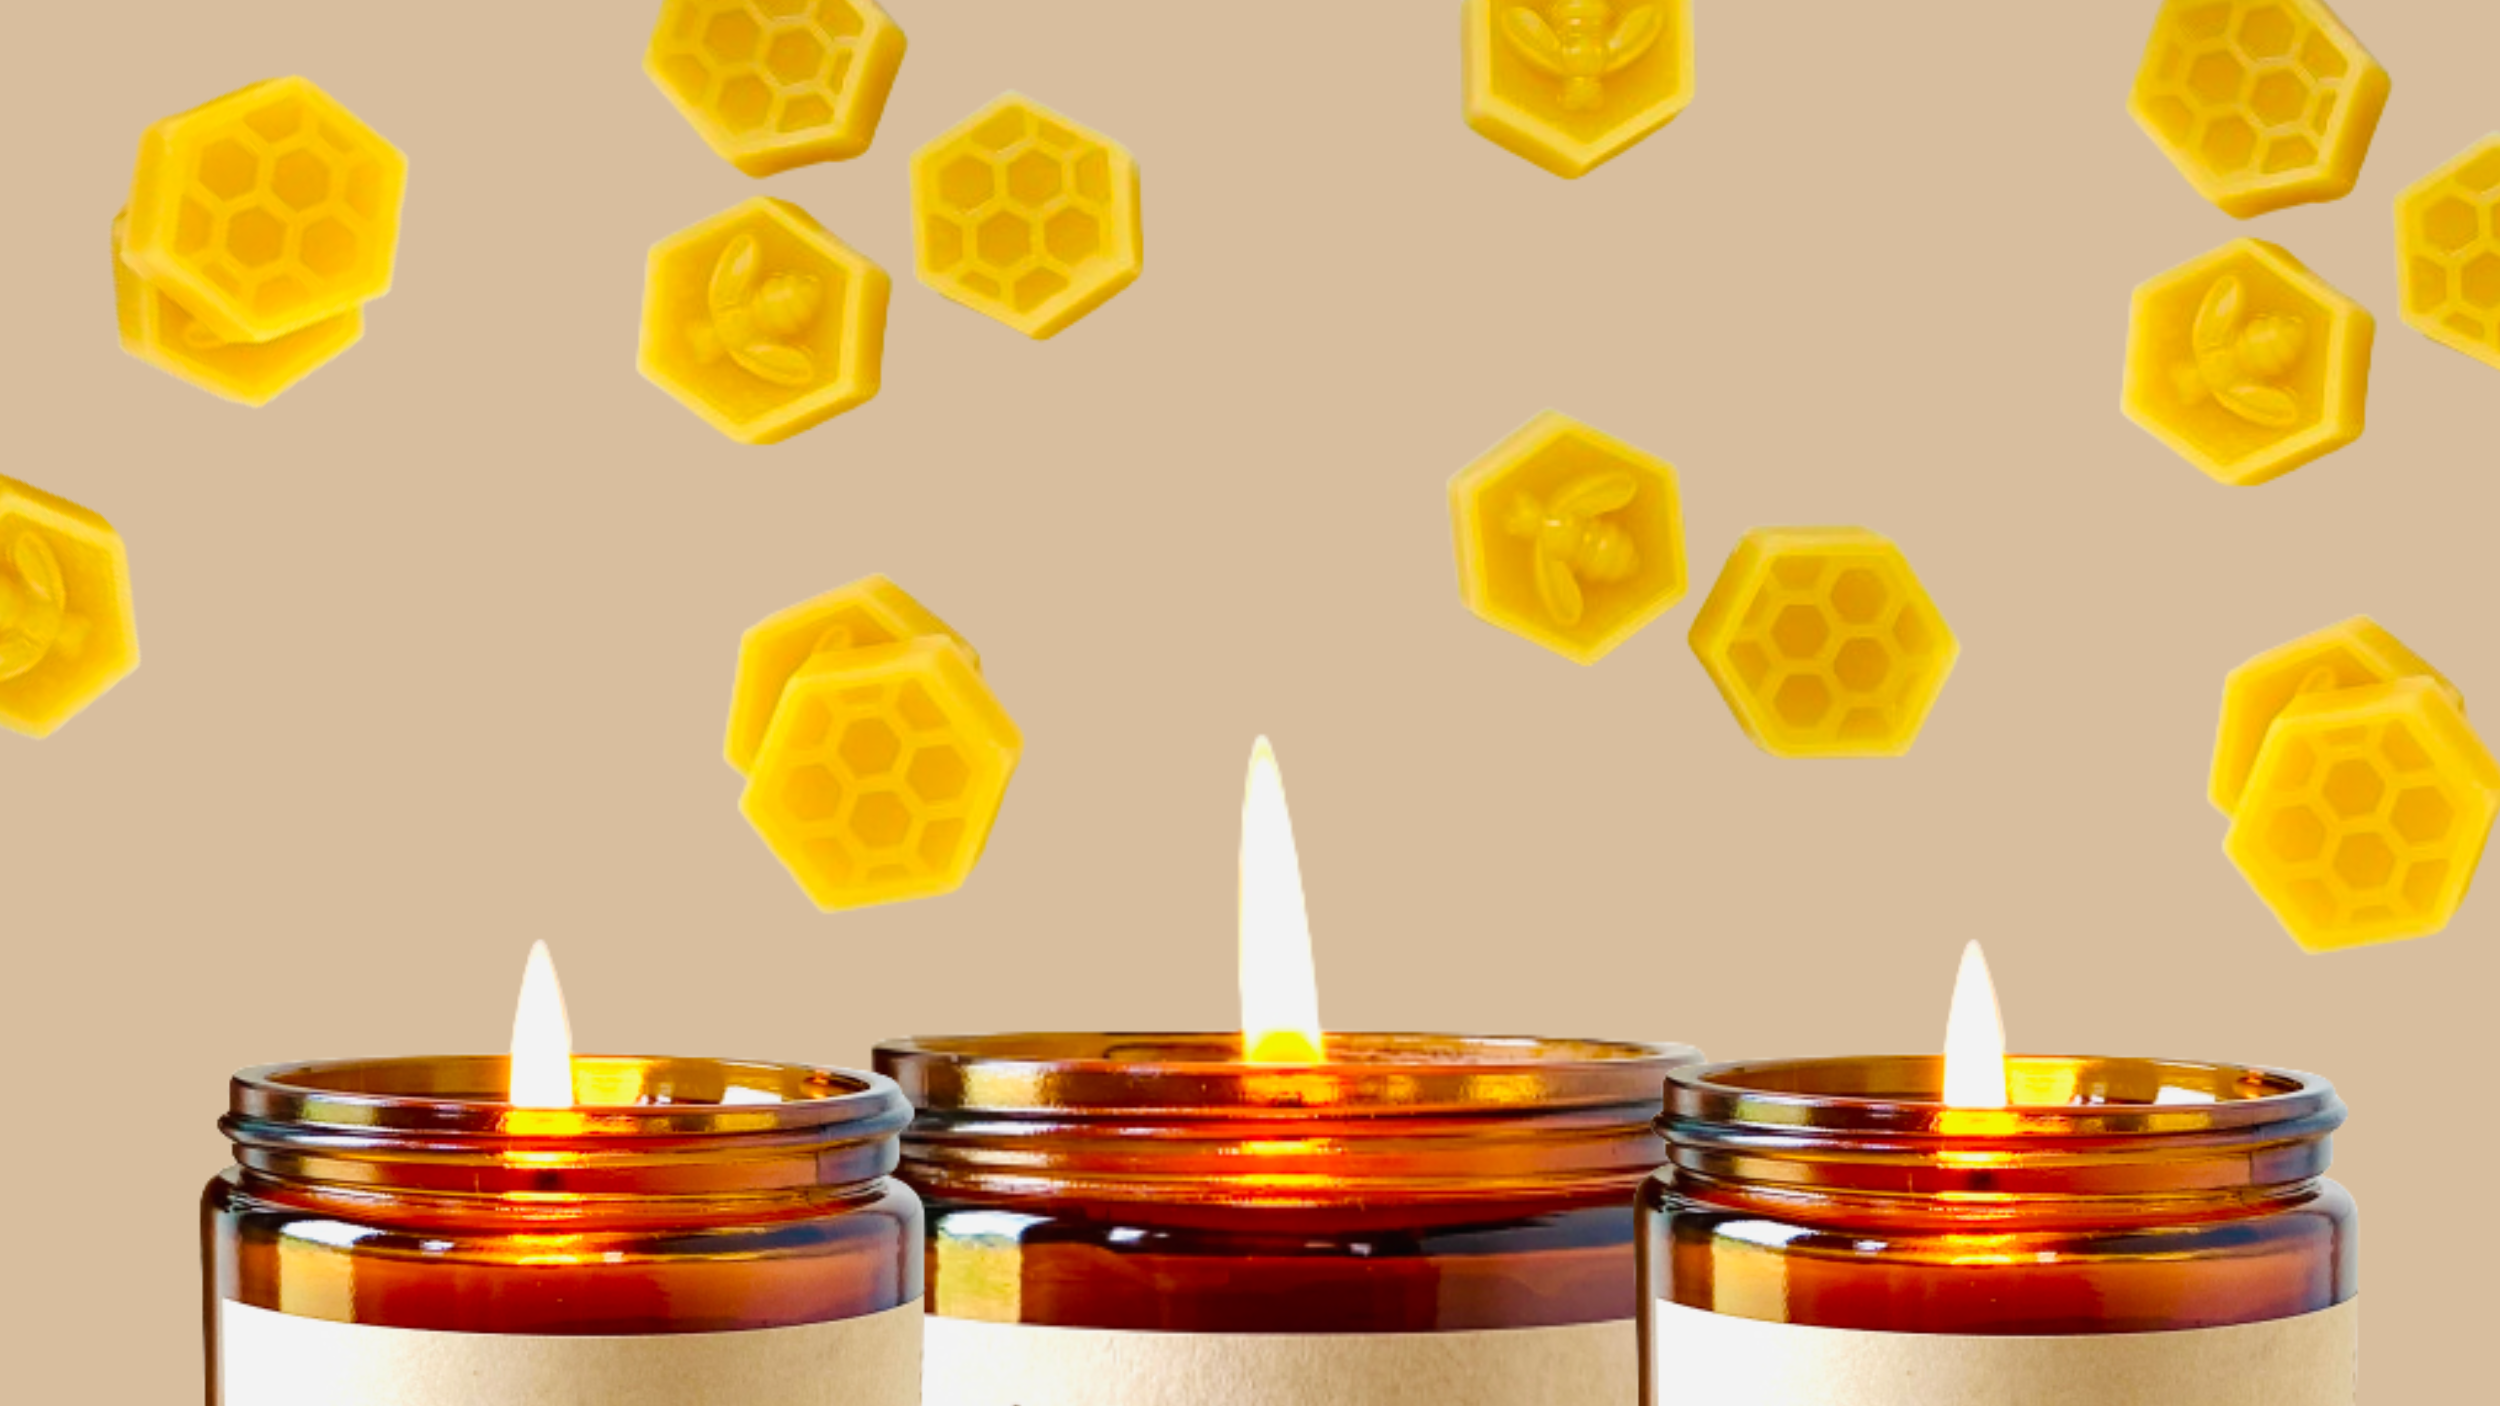 Purely Beeswax 100% Pure Beeswax Candle Unscented Natural Honey Scent Only  Beeswax & Cotton Wick Handmade by Aire Candle Co. 